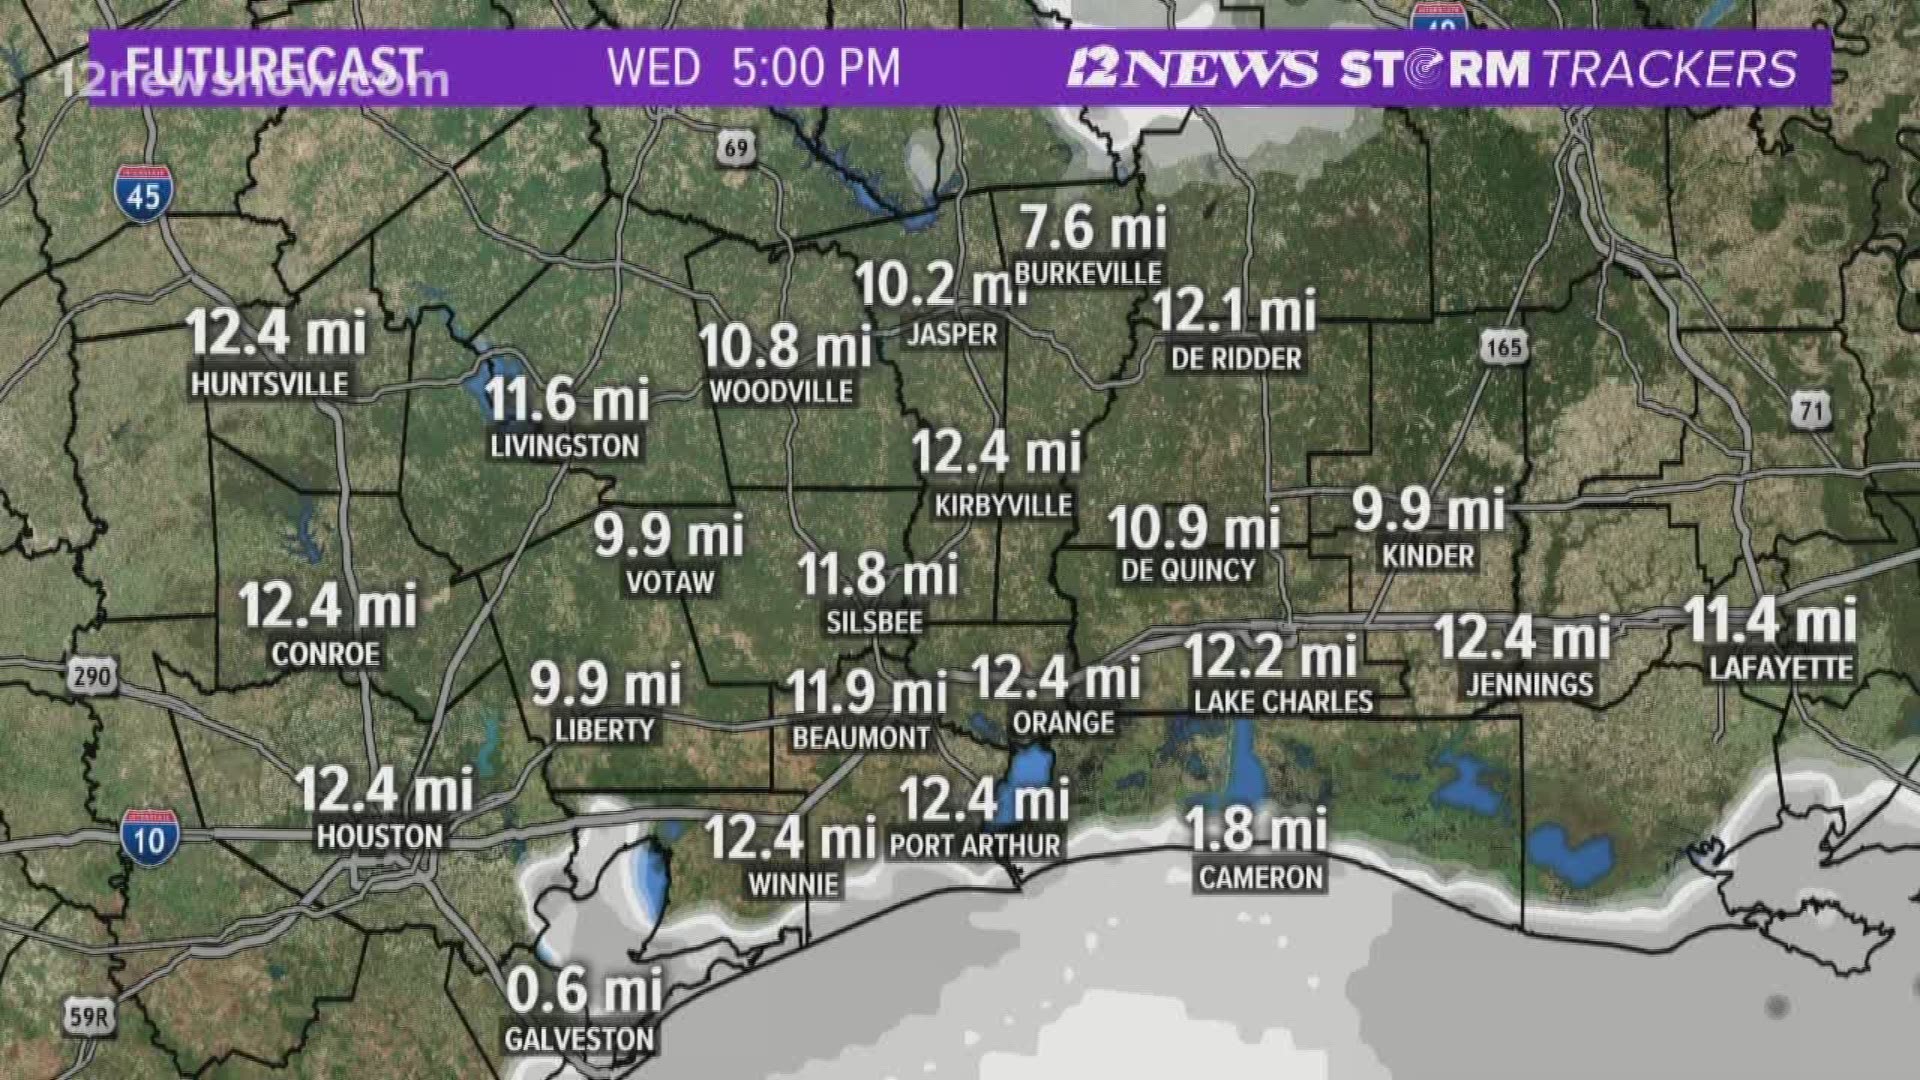 The fog advisory will last from 9 p.m. Wednesday into Thursday morning in Jefferson and Orange Counties. The fog will have a widespread coverage over SETX.